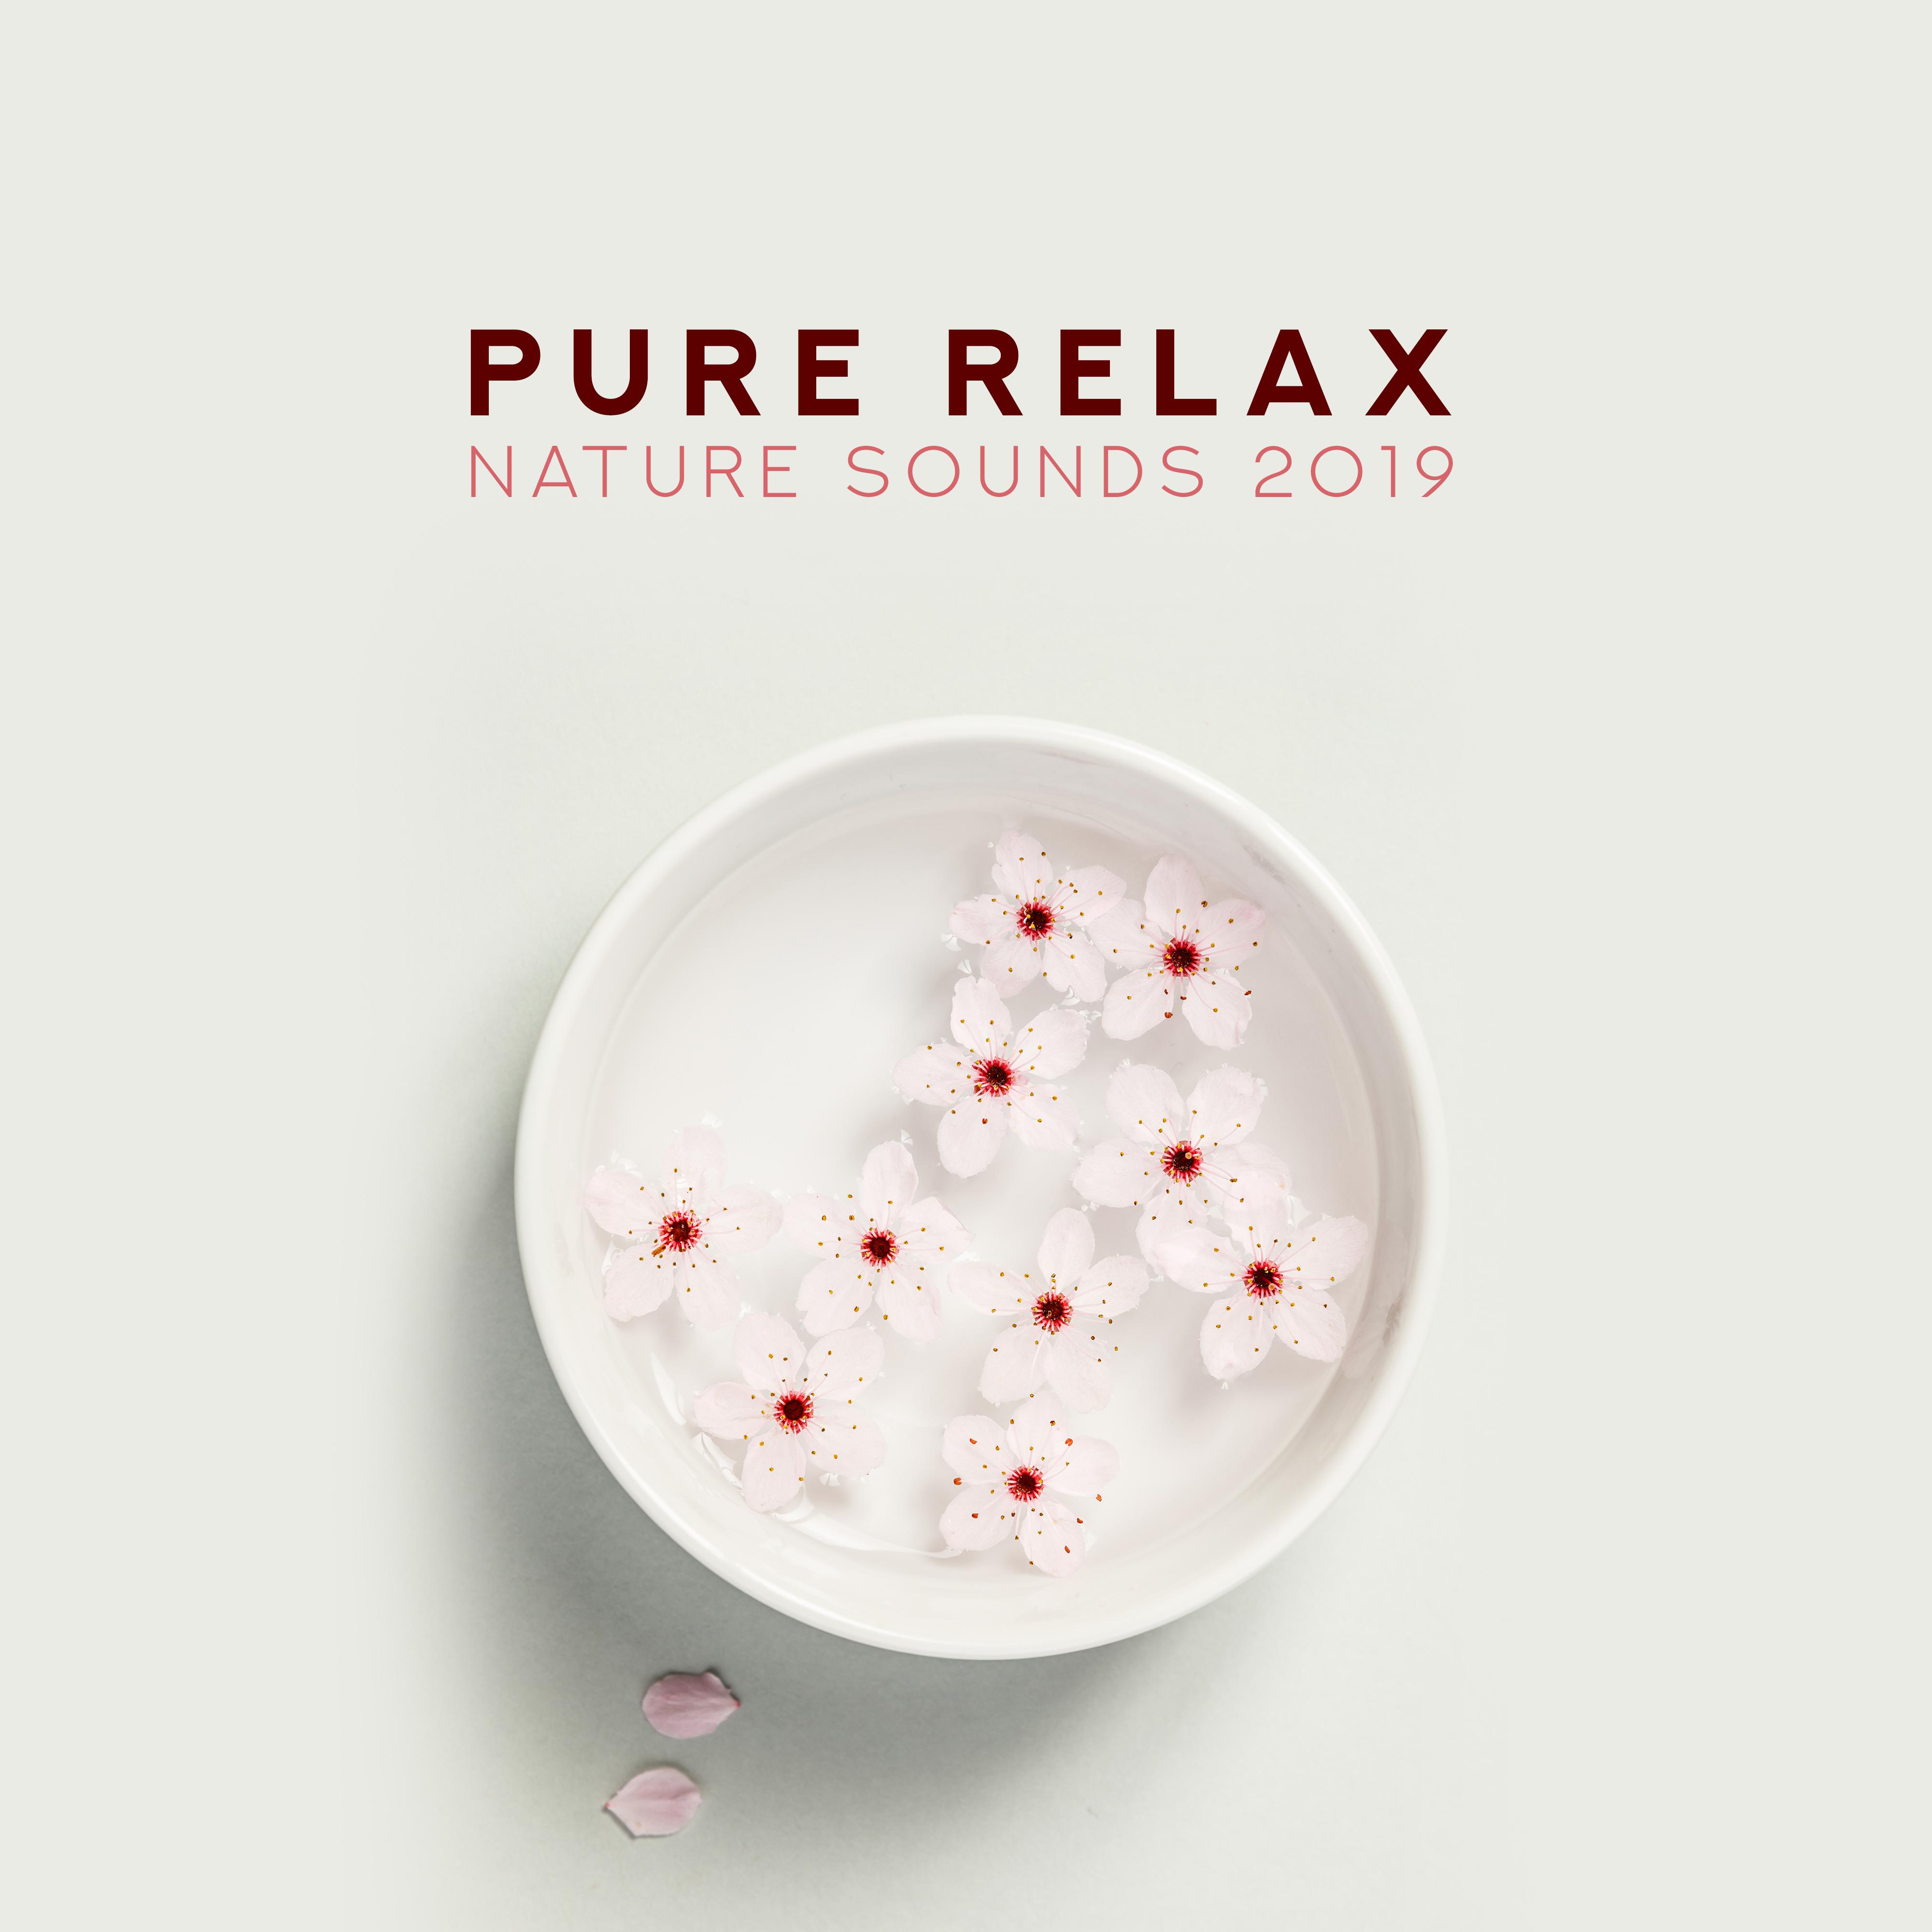 Pure Relax Nature Sounds 2019